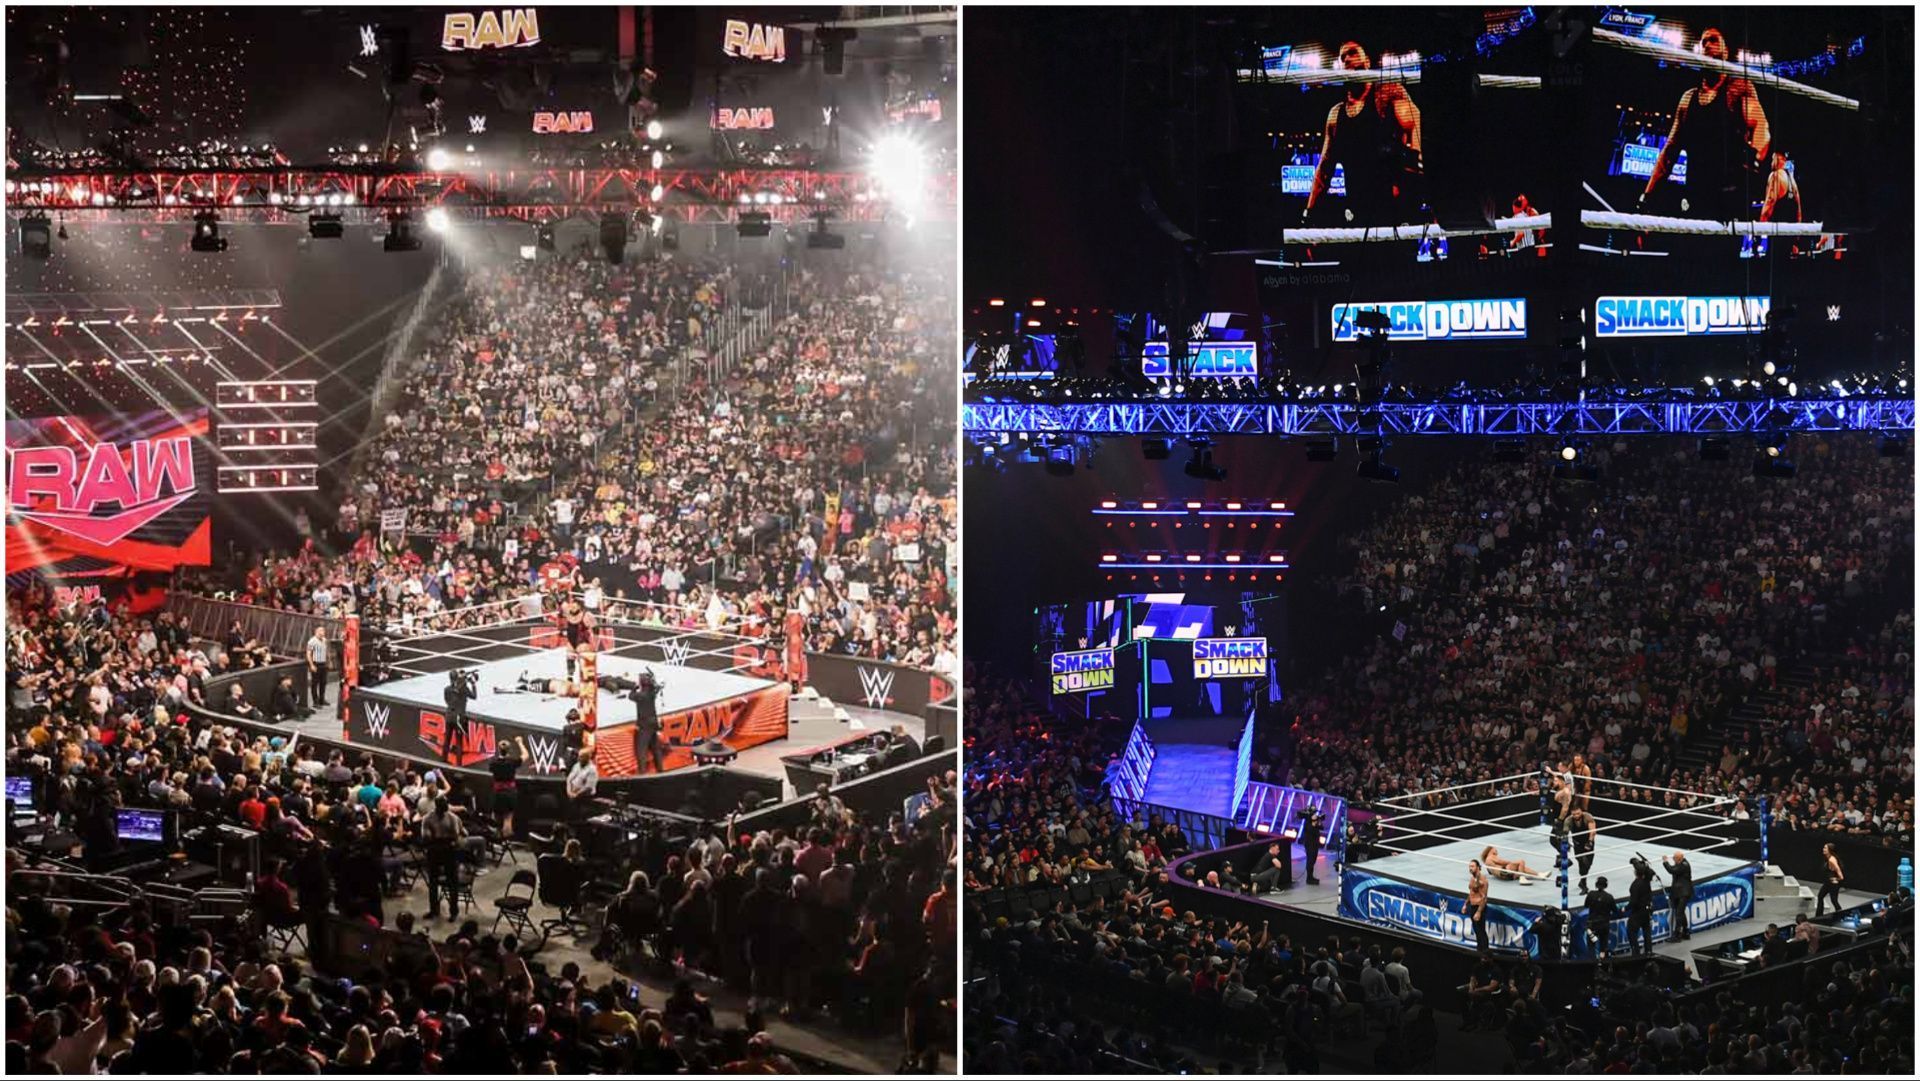 The WWE Universe packs arenas for RAW and SmackDown